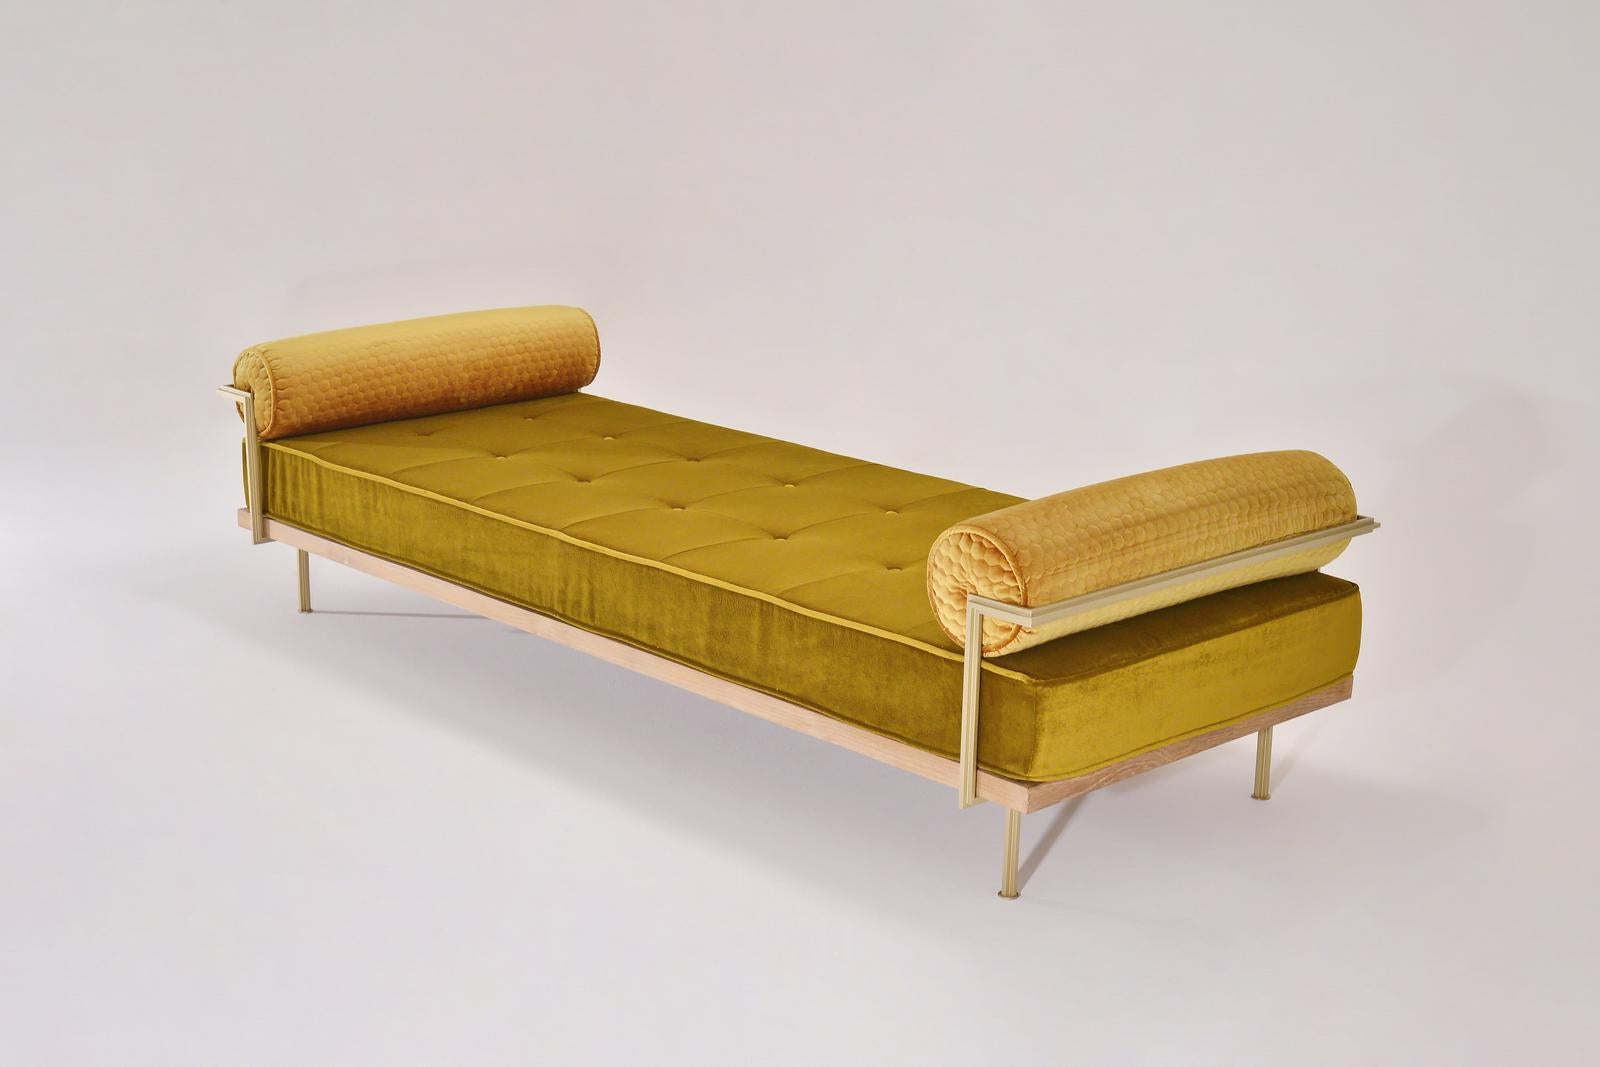 Model: PT76 double daybed
Dimensions: 225 x 86 x 57 cm; Seat height 38.5 cm 
(w x d x h) 88.6 x 33.9 x 22.4 inch; Seat height 15.2 cm 
Frame: Reclaimed hardwood
Frame finish: Natural oiled
Structure: Extruded and hand-welded solid brass